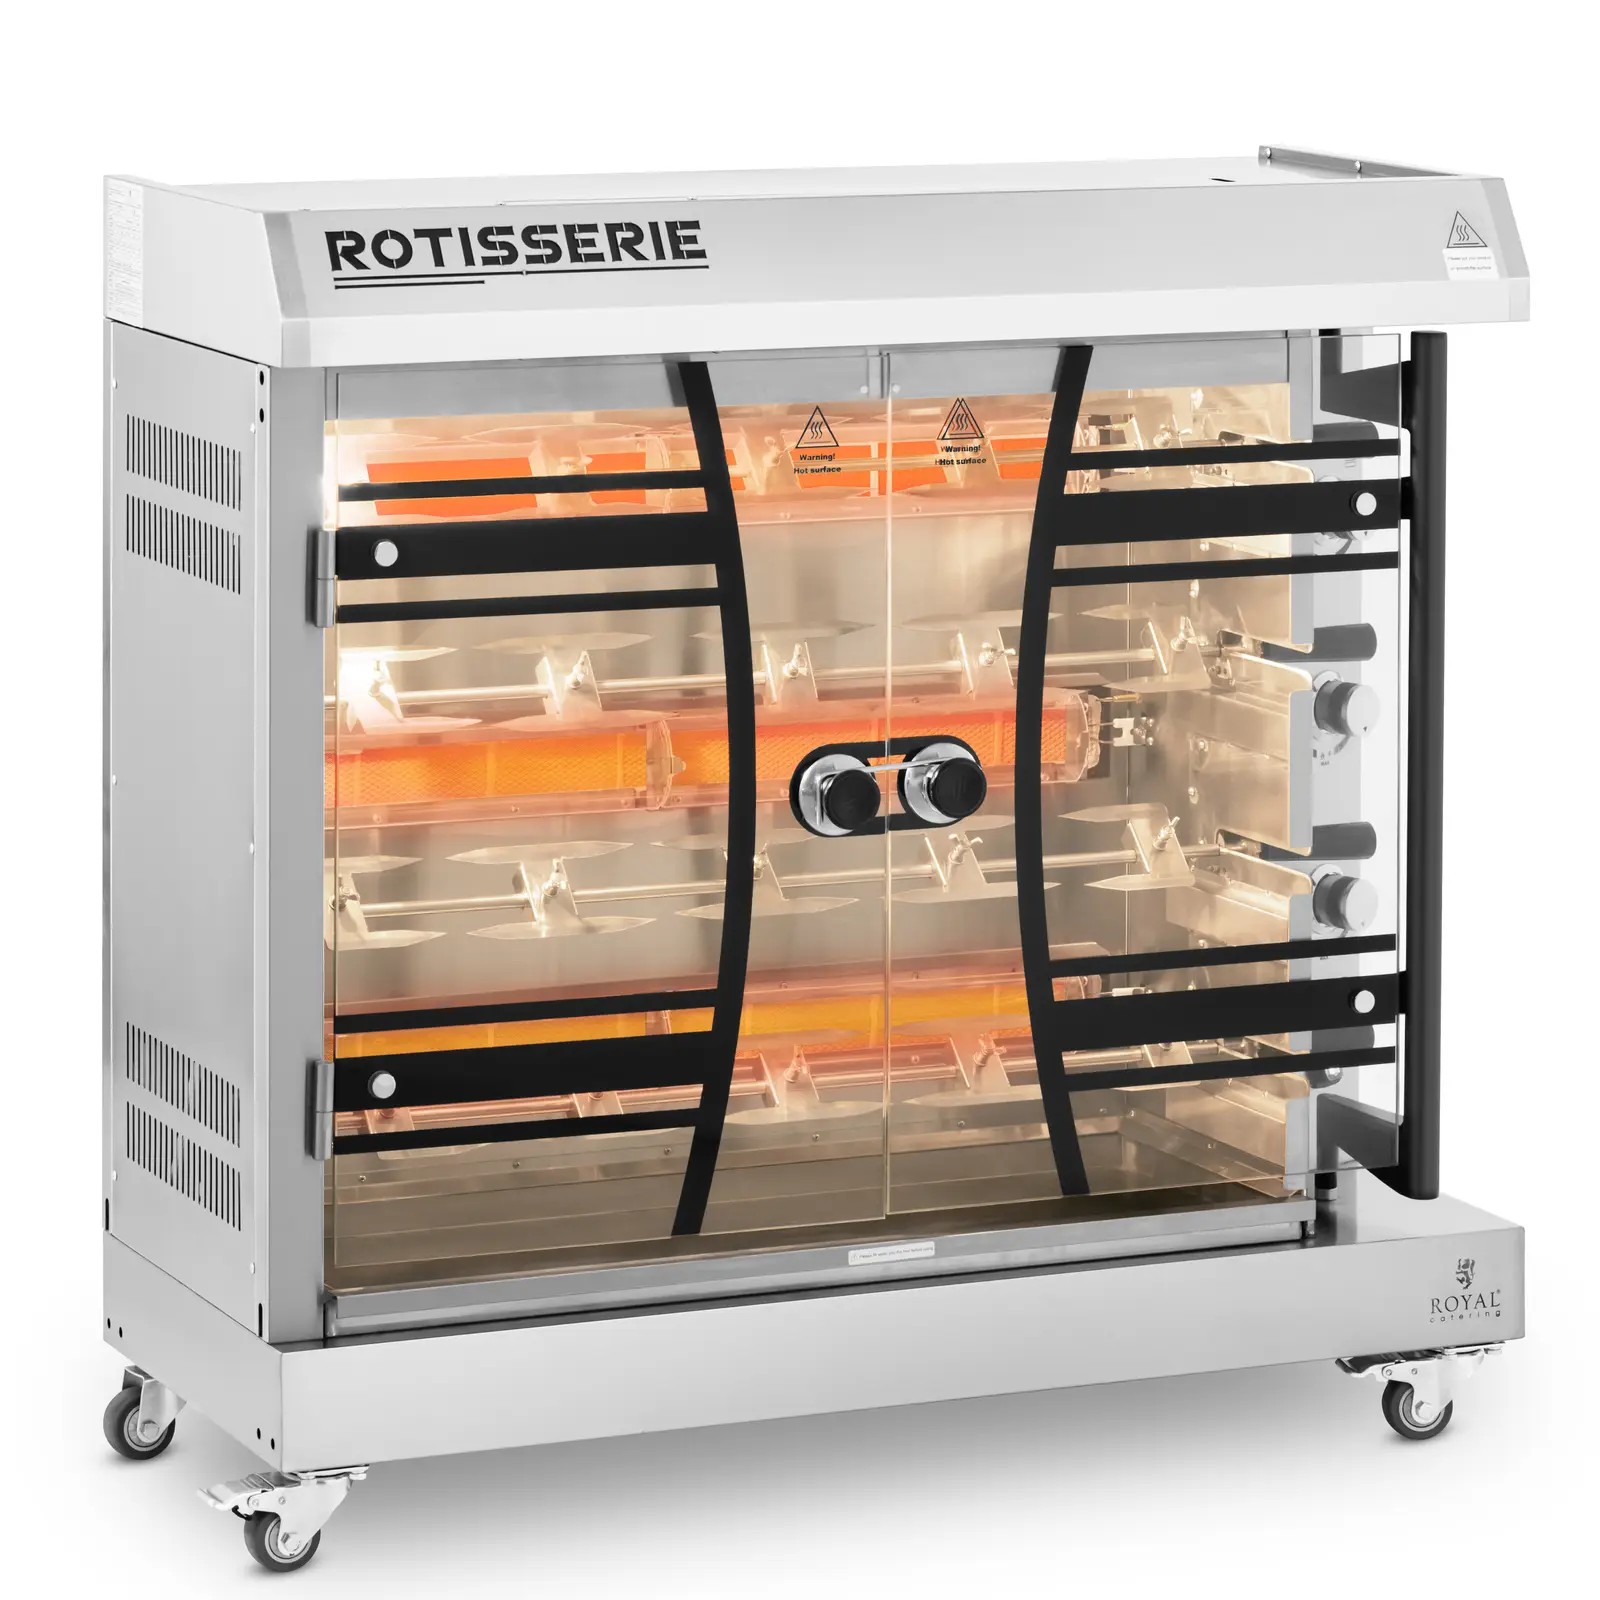 Gas Rotisserie Grill - 4 spits - with lights and wheels - Royal Catering